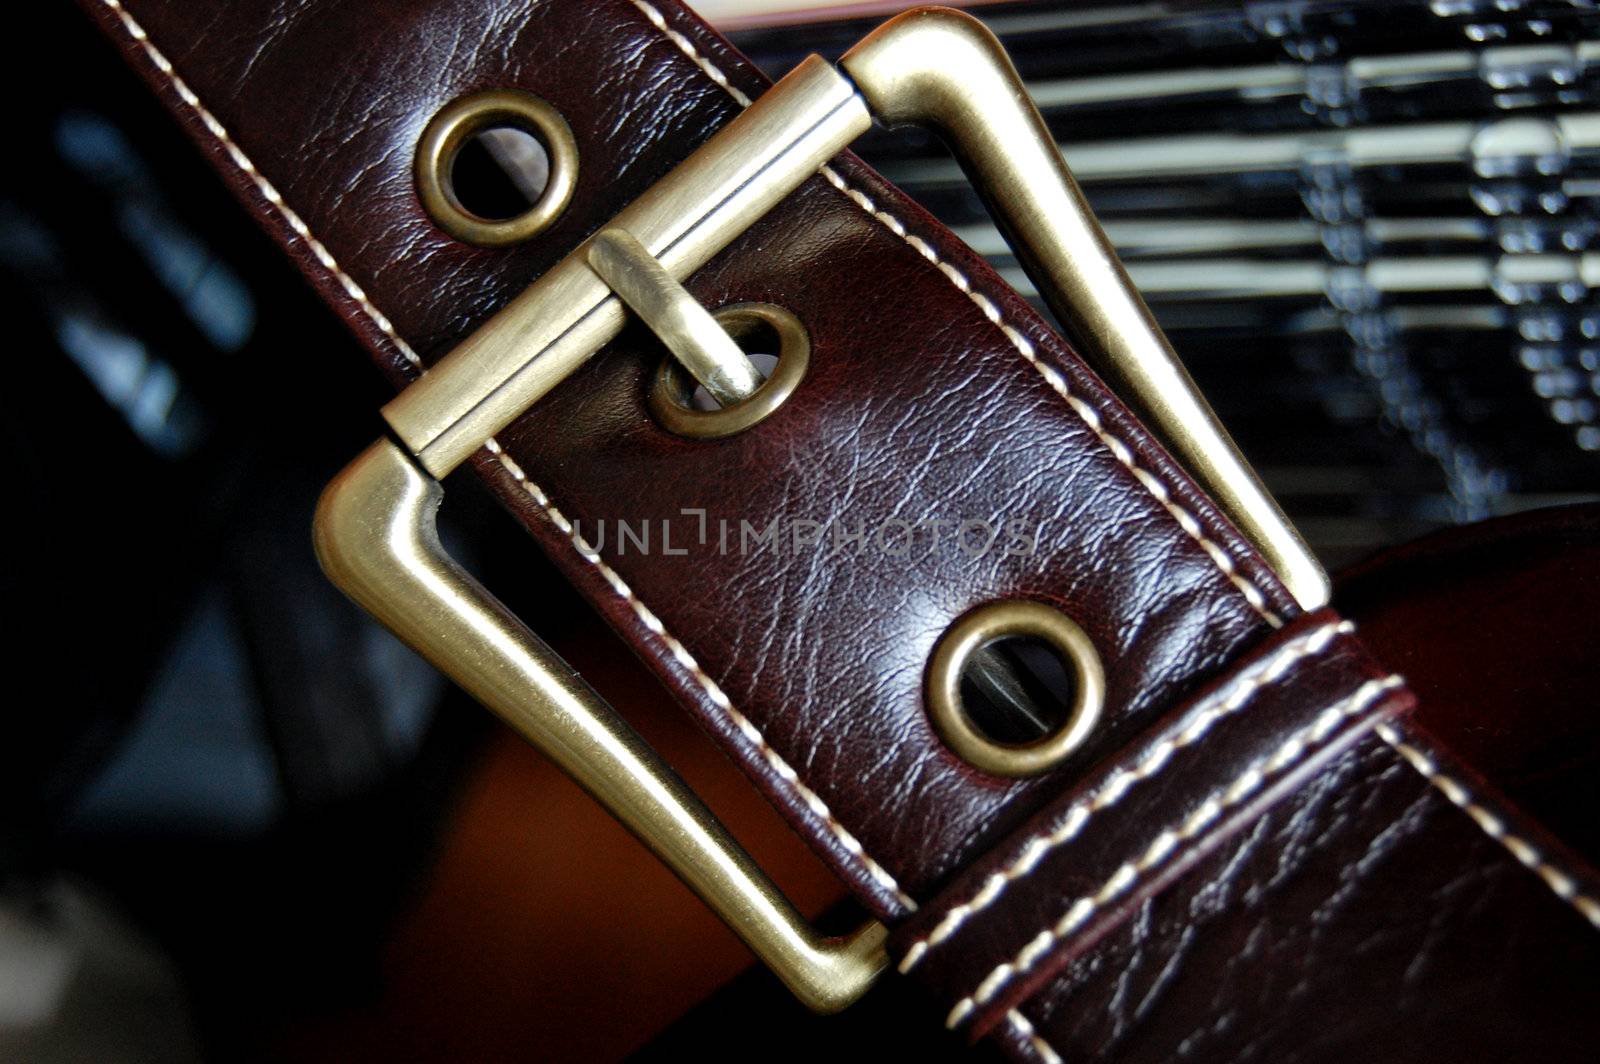 Buckle of a female brown leather bag